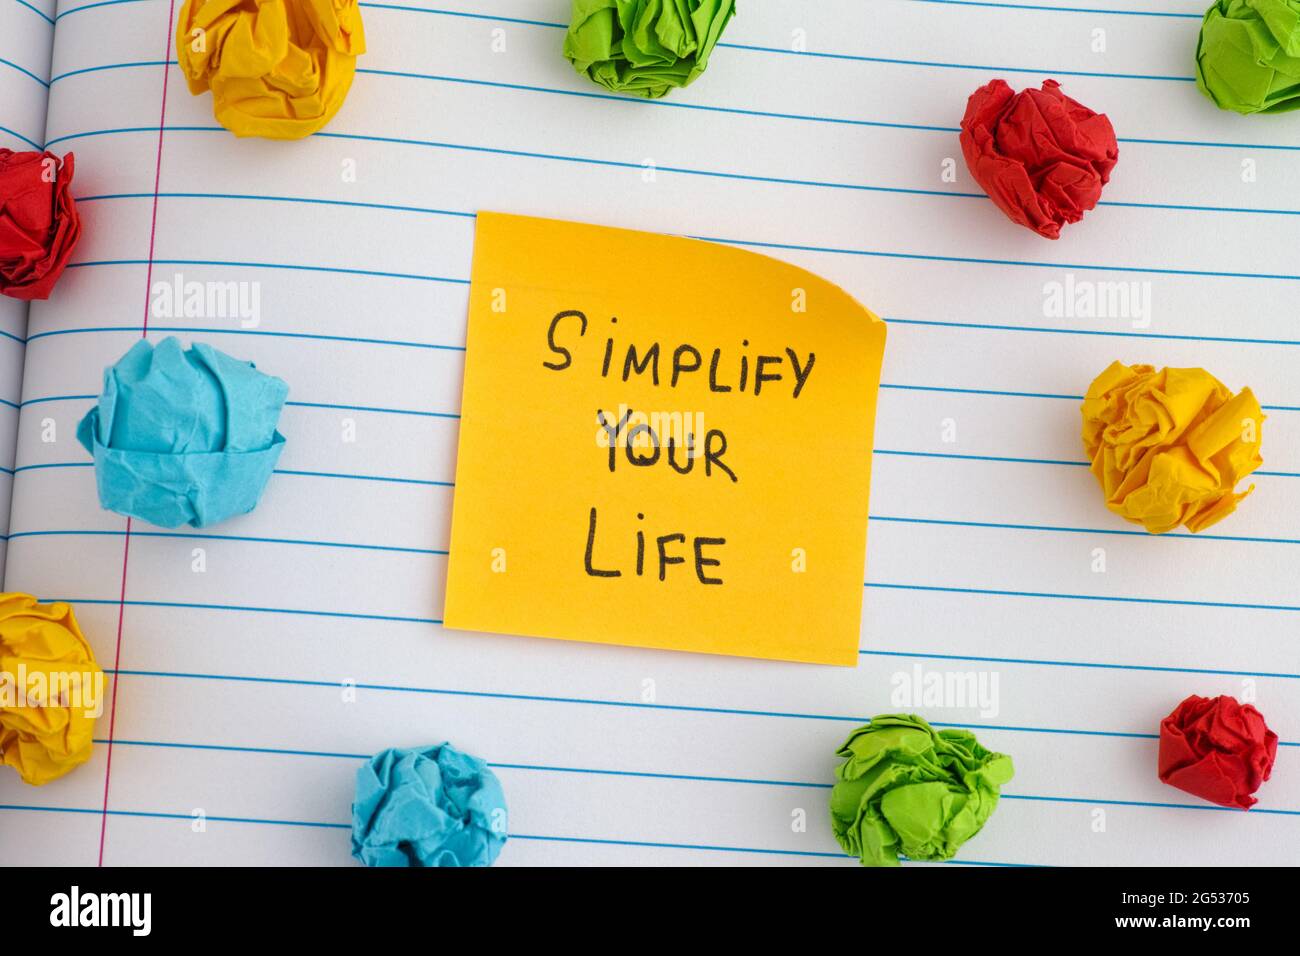 Simplify Your Life. A yellow paper note with the phrase Simplify Your Life on it with some colorful crumpled paper balls around it. Close up. Stock Photo